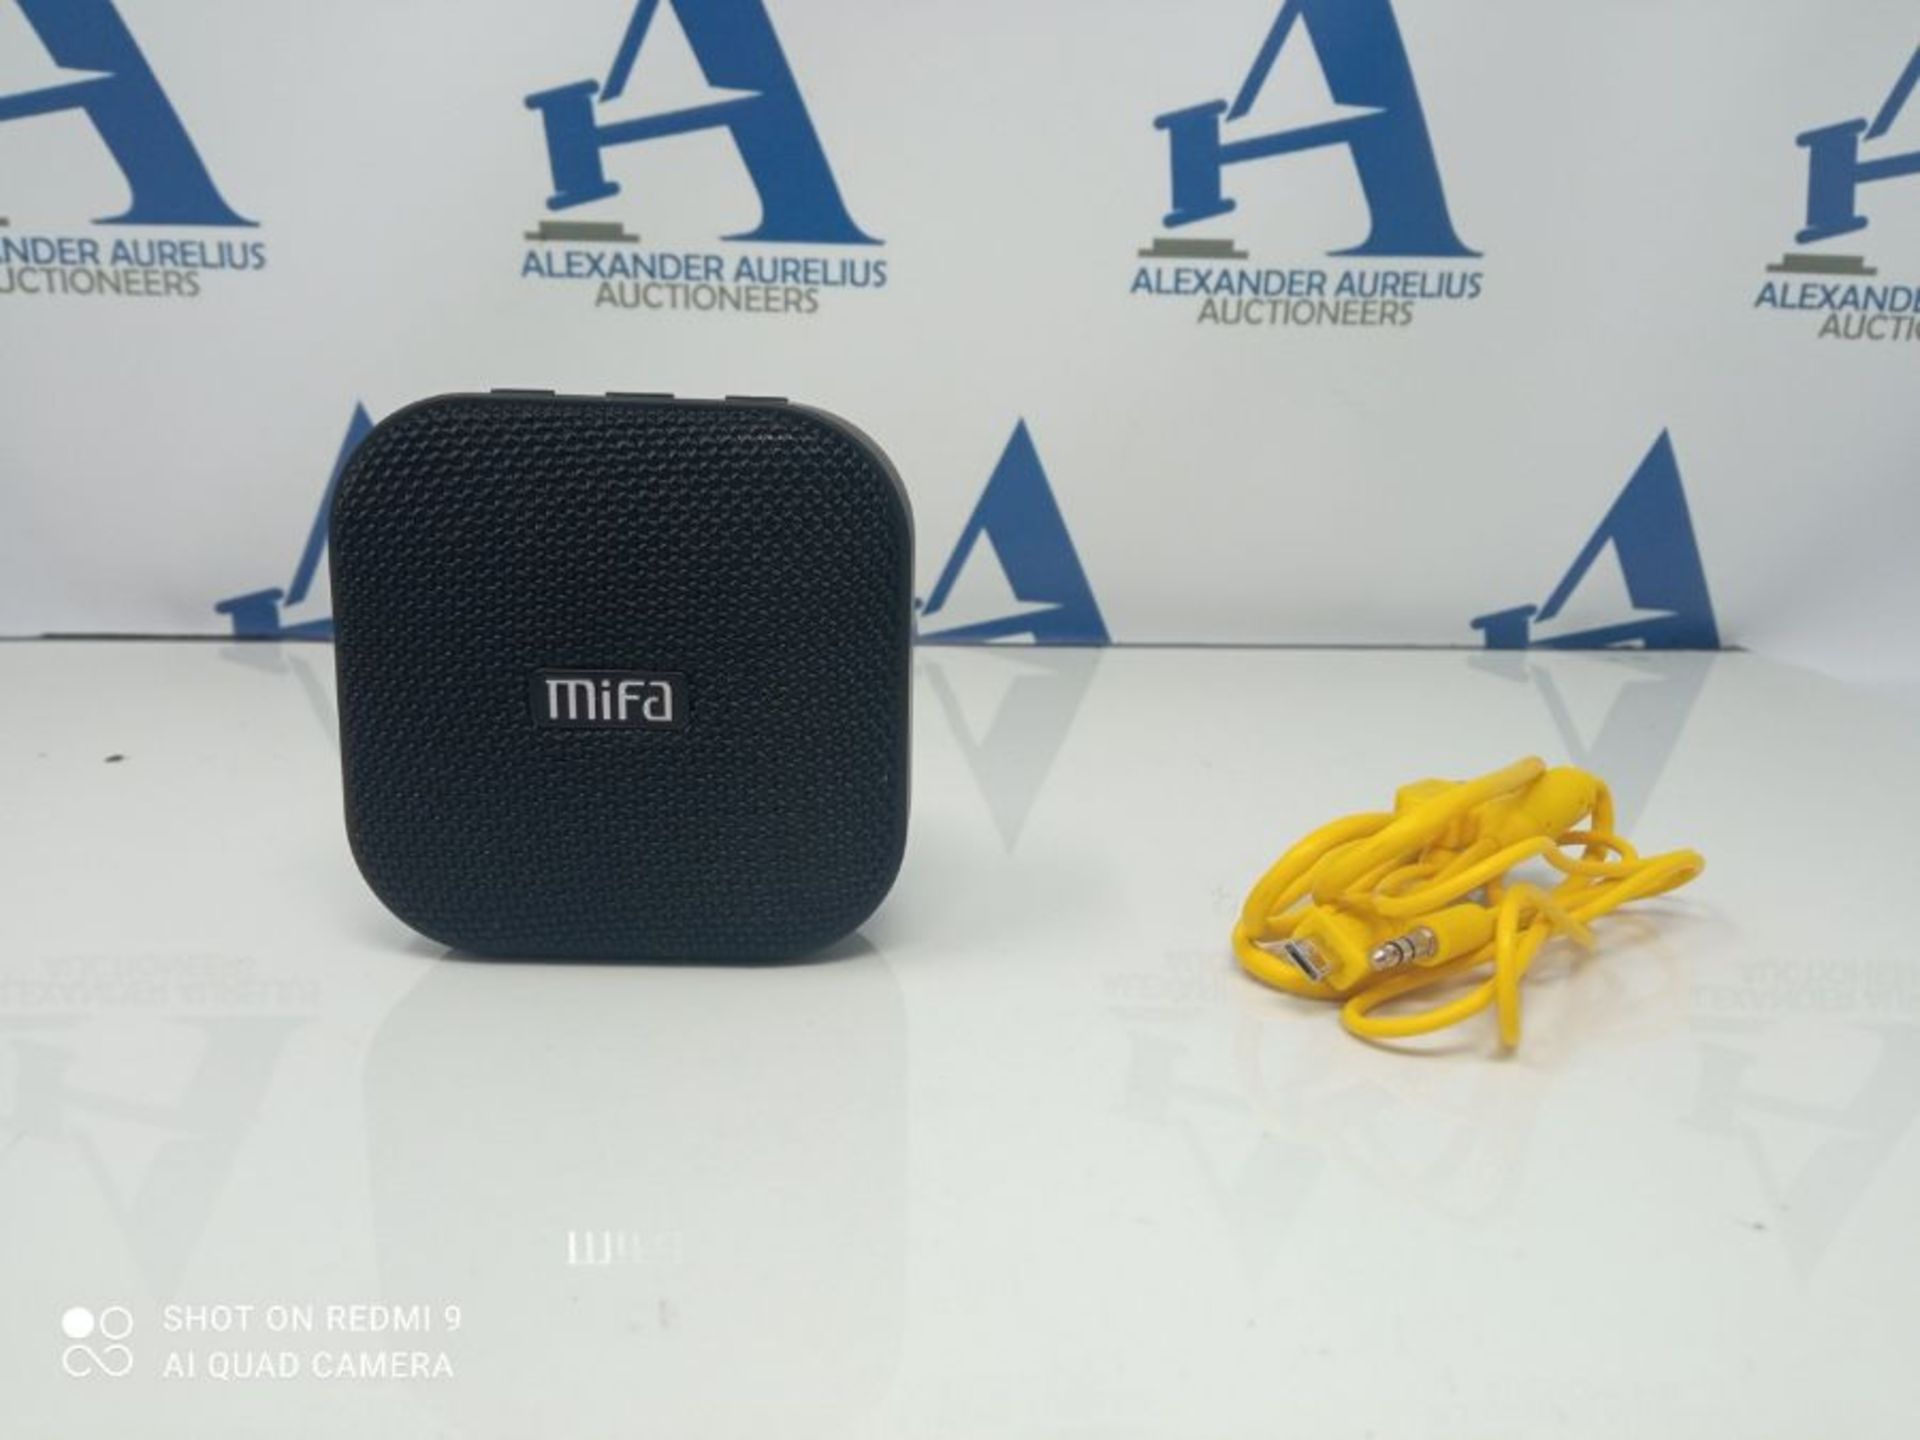 Bluetooth Speaker, MIFA A1 Portable Wireless Speaker with DSP Sound, 12-Hour Playtime, - Image 3 of 3